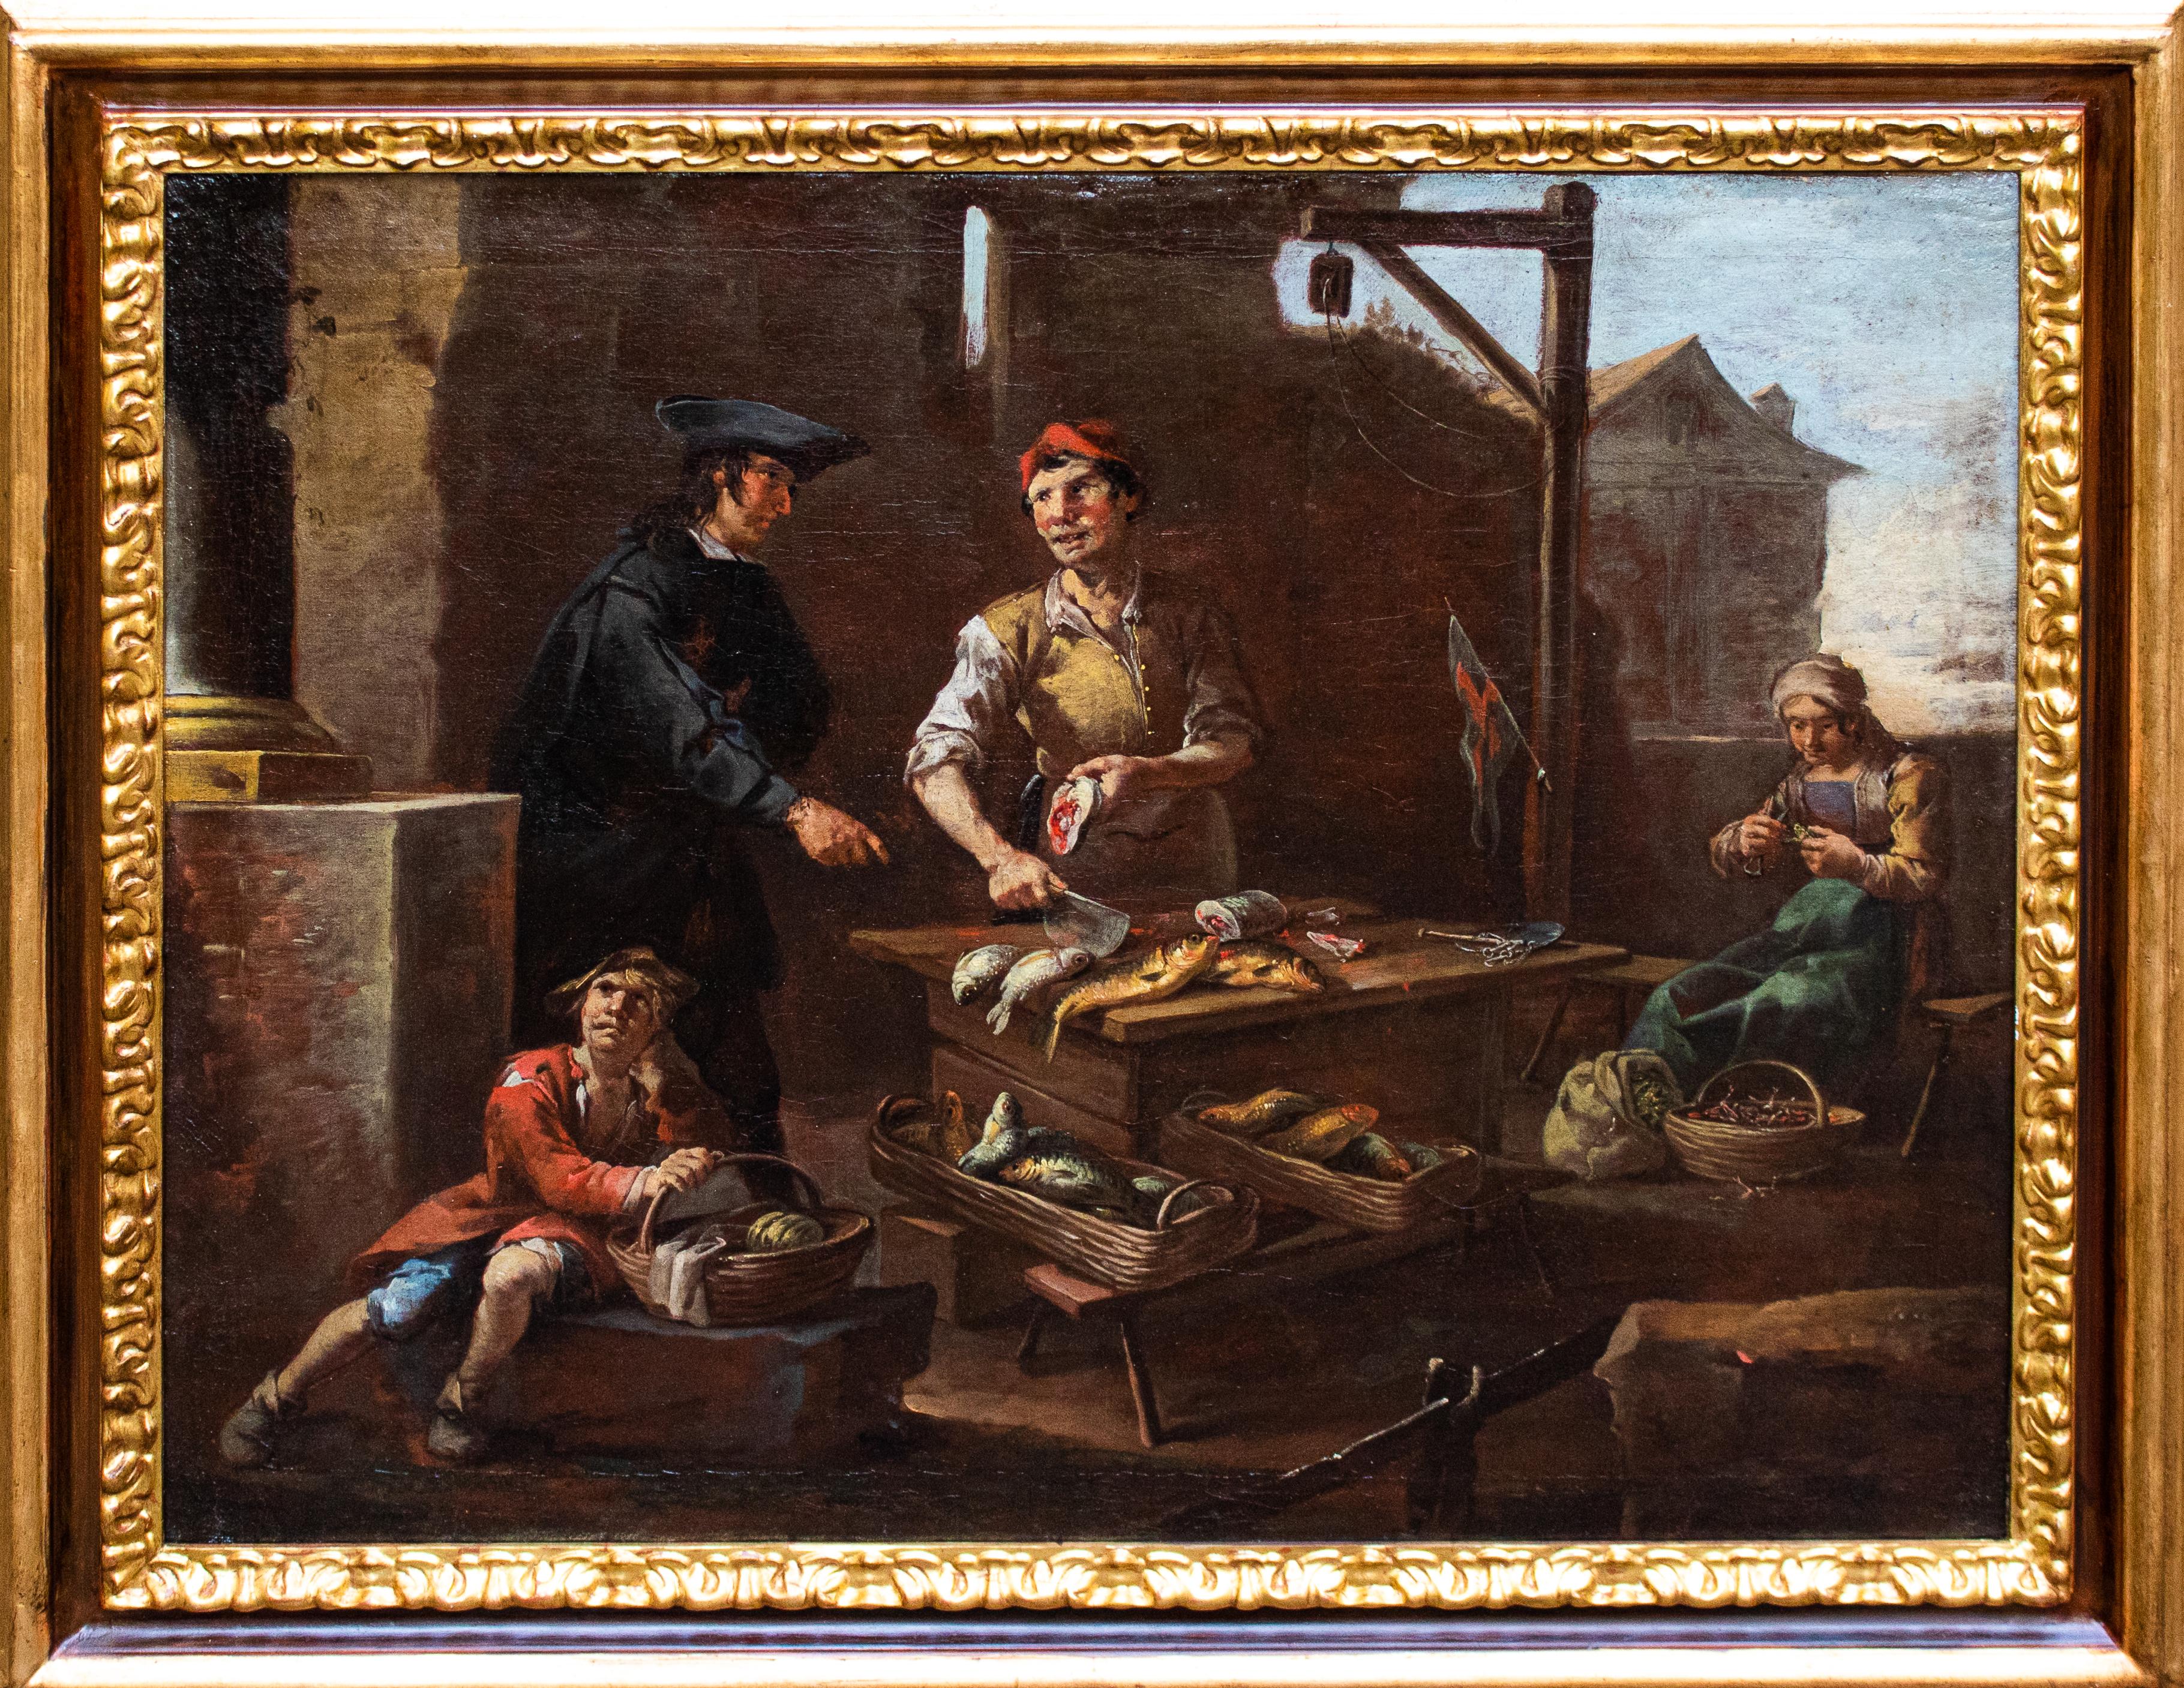 The Fishmonger Painted by Giacomo Francesco Cipper known as the Todeschini